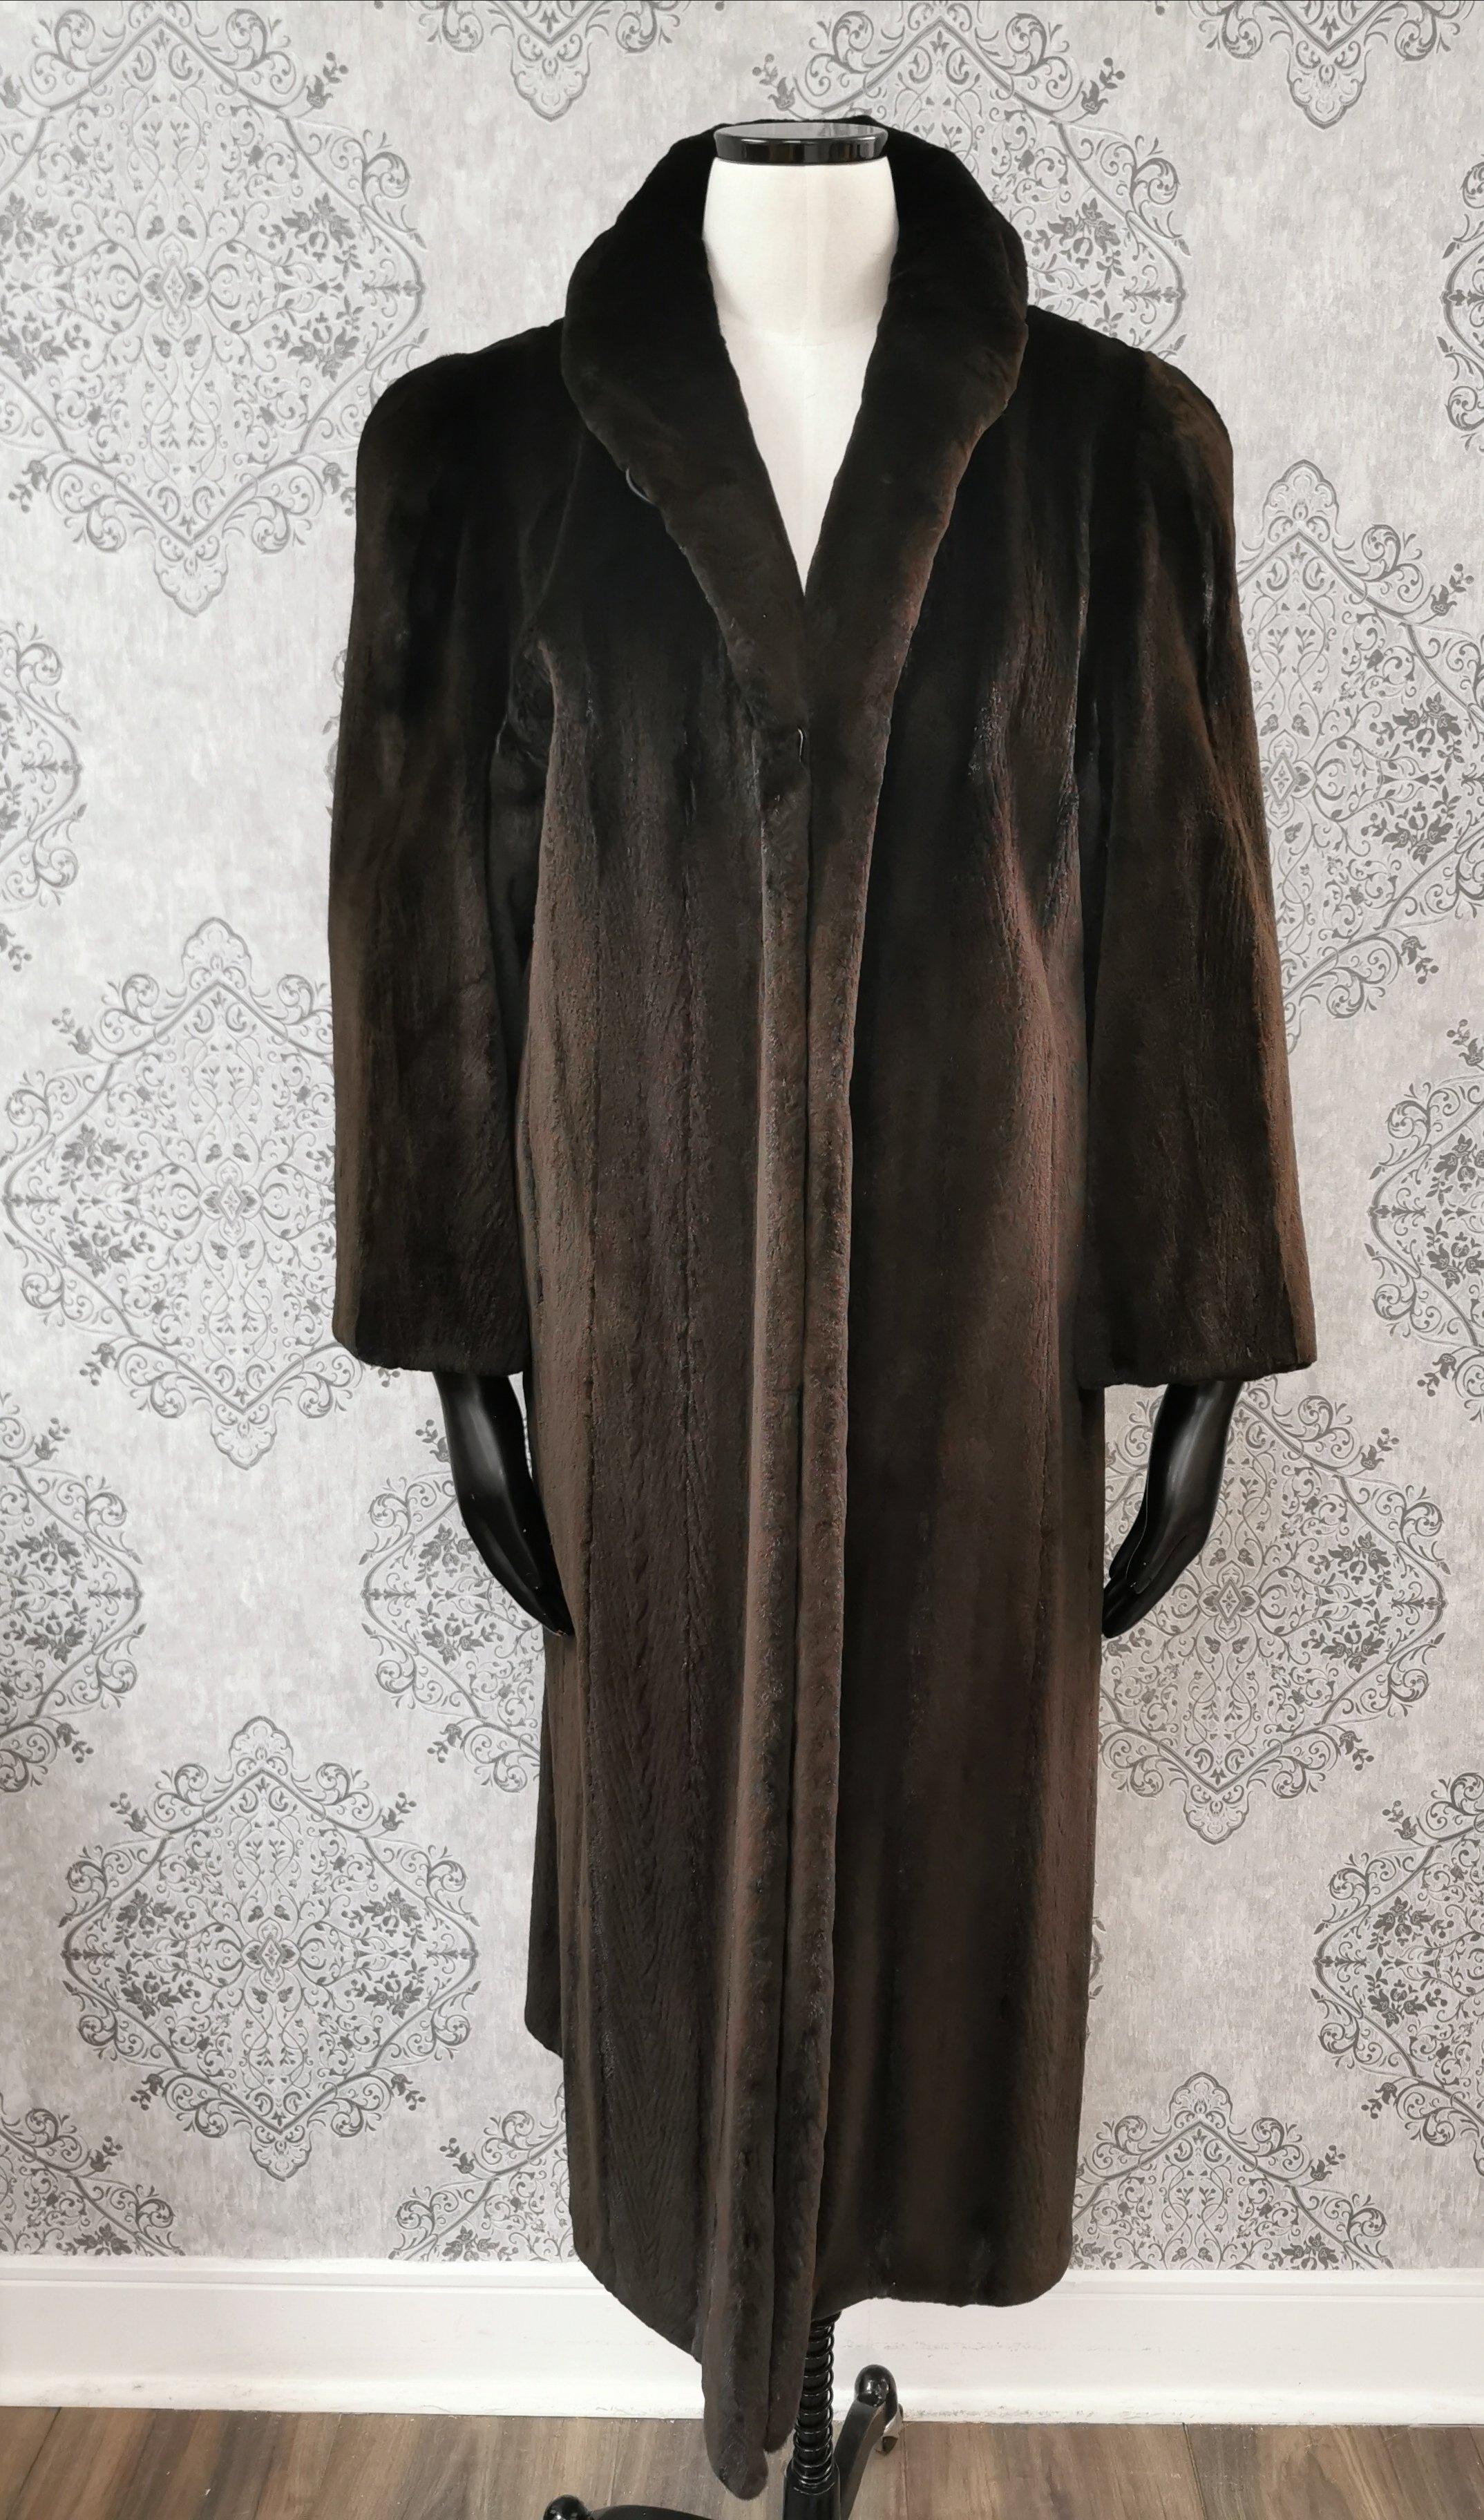 Brand New Blackglama Ranch Sheared Mink Full length Stroller Fur Coat  (Size 14 - Large)

Made in Luxurious Ranch mink, short collar with a large coat button, additional closure with eyes and hooks, two side slit pockets and a black satin full